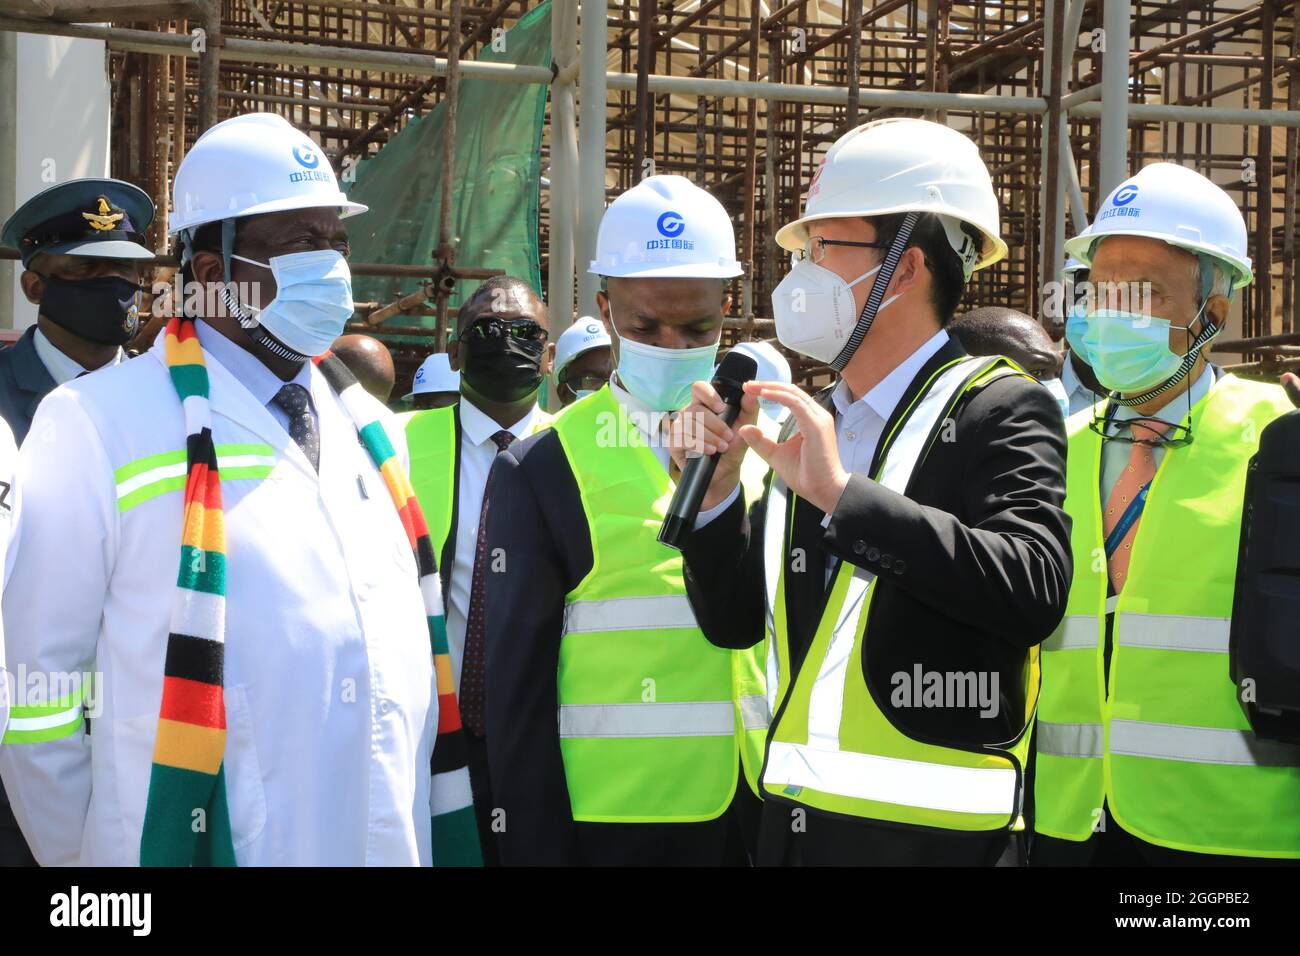 (210902) -- HARARE, Sept. 2, 2021 (Xinhua) -- Zimbabwean President Emmerson Mnangagwa (1st L, front) talks to project manager Wei Wei (2nd R) at the construction site of the expansion project of Robert Gabriel Mugabe International Airport in Harare, Zimbabwe, Sept. 1, 2021.  The completion of Robert Gabriel Mugabe International Airport expansion will significantly increase tourist arrivals, Zimbabwean President Emmerson Mnangagwa said Wednesday.   The project, undertaken by China Jiangsu International, a Chinese contractor, is underway despite delays caused by the COVID-19 pandemic. (Photo by Stock Photo